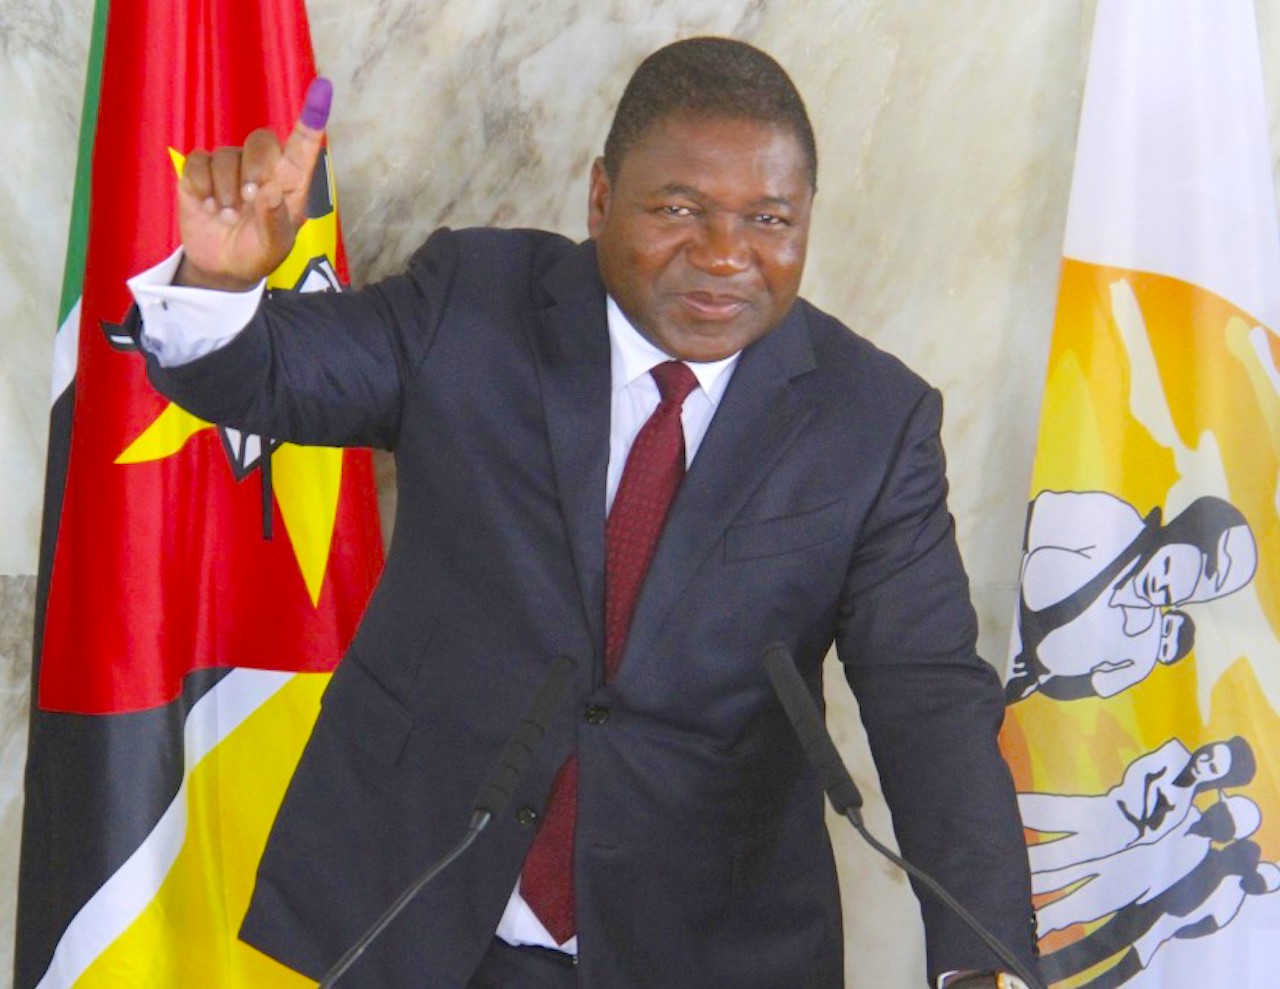 Mozambican President Felipe Nyusi in Maputo, Mozambique, during elections in October 2019. (Image by Ferhat Momade/Associated Press)